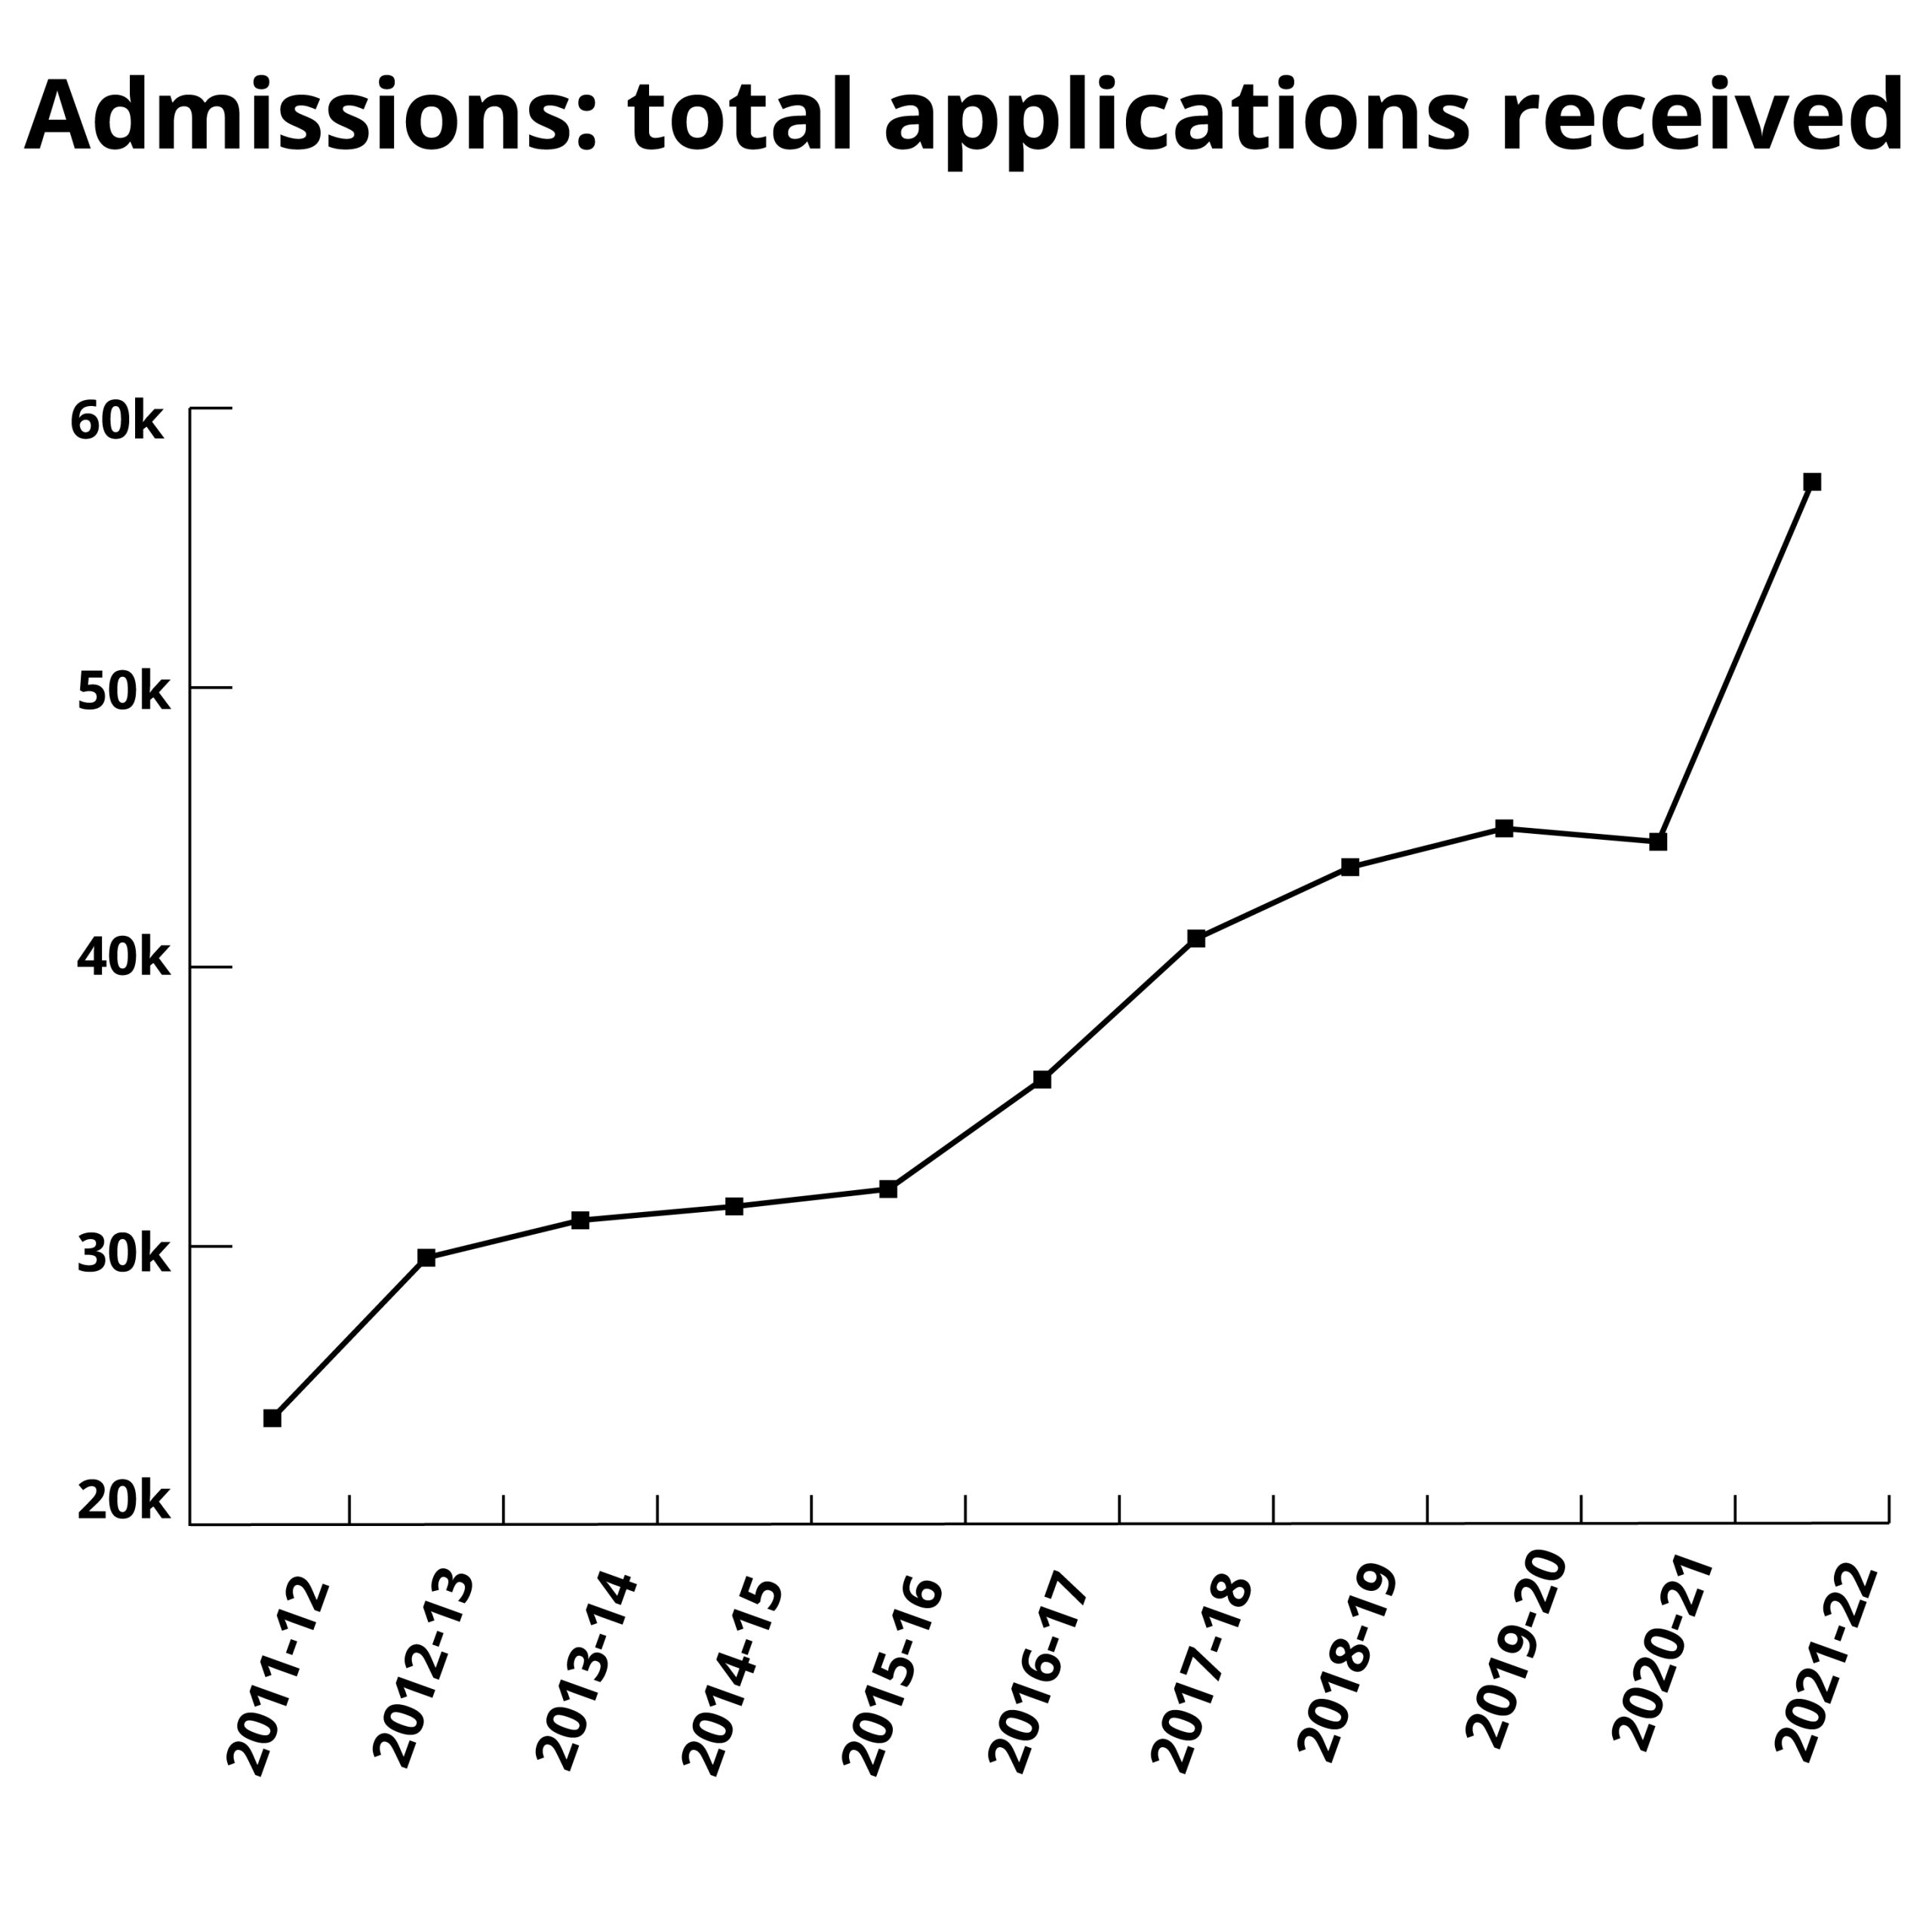 Graph charting the total number of admissions applications received over an 11 year period. The numbers rose steadily from around 23,000 in 2011-2012 to almost 60,000 in 2021-2022.